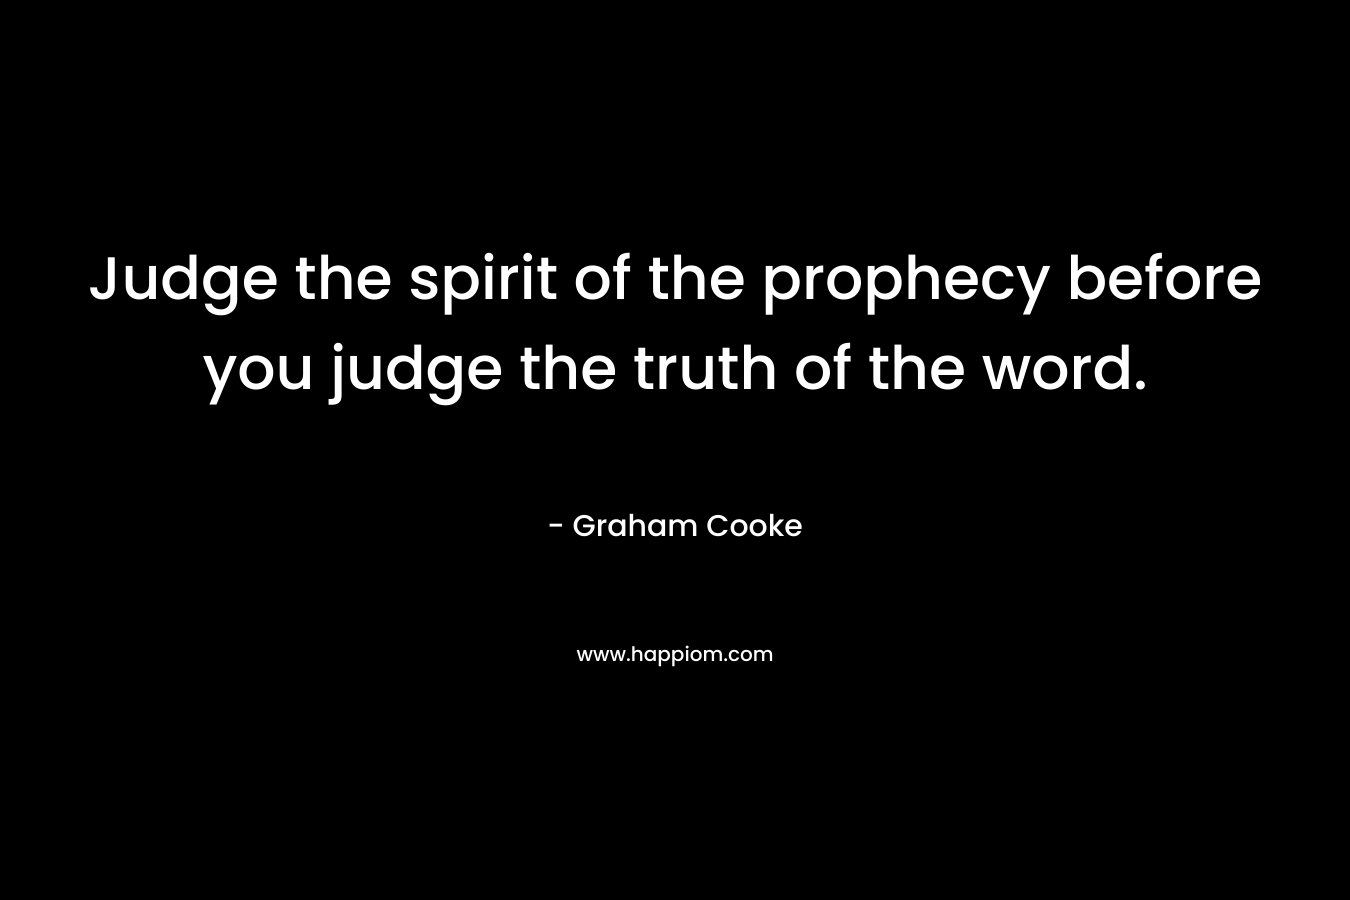 Judge the spirit of the prophecy before you judge the truth of the word.